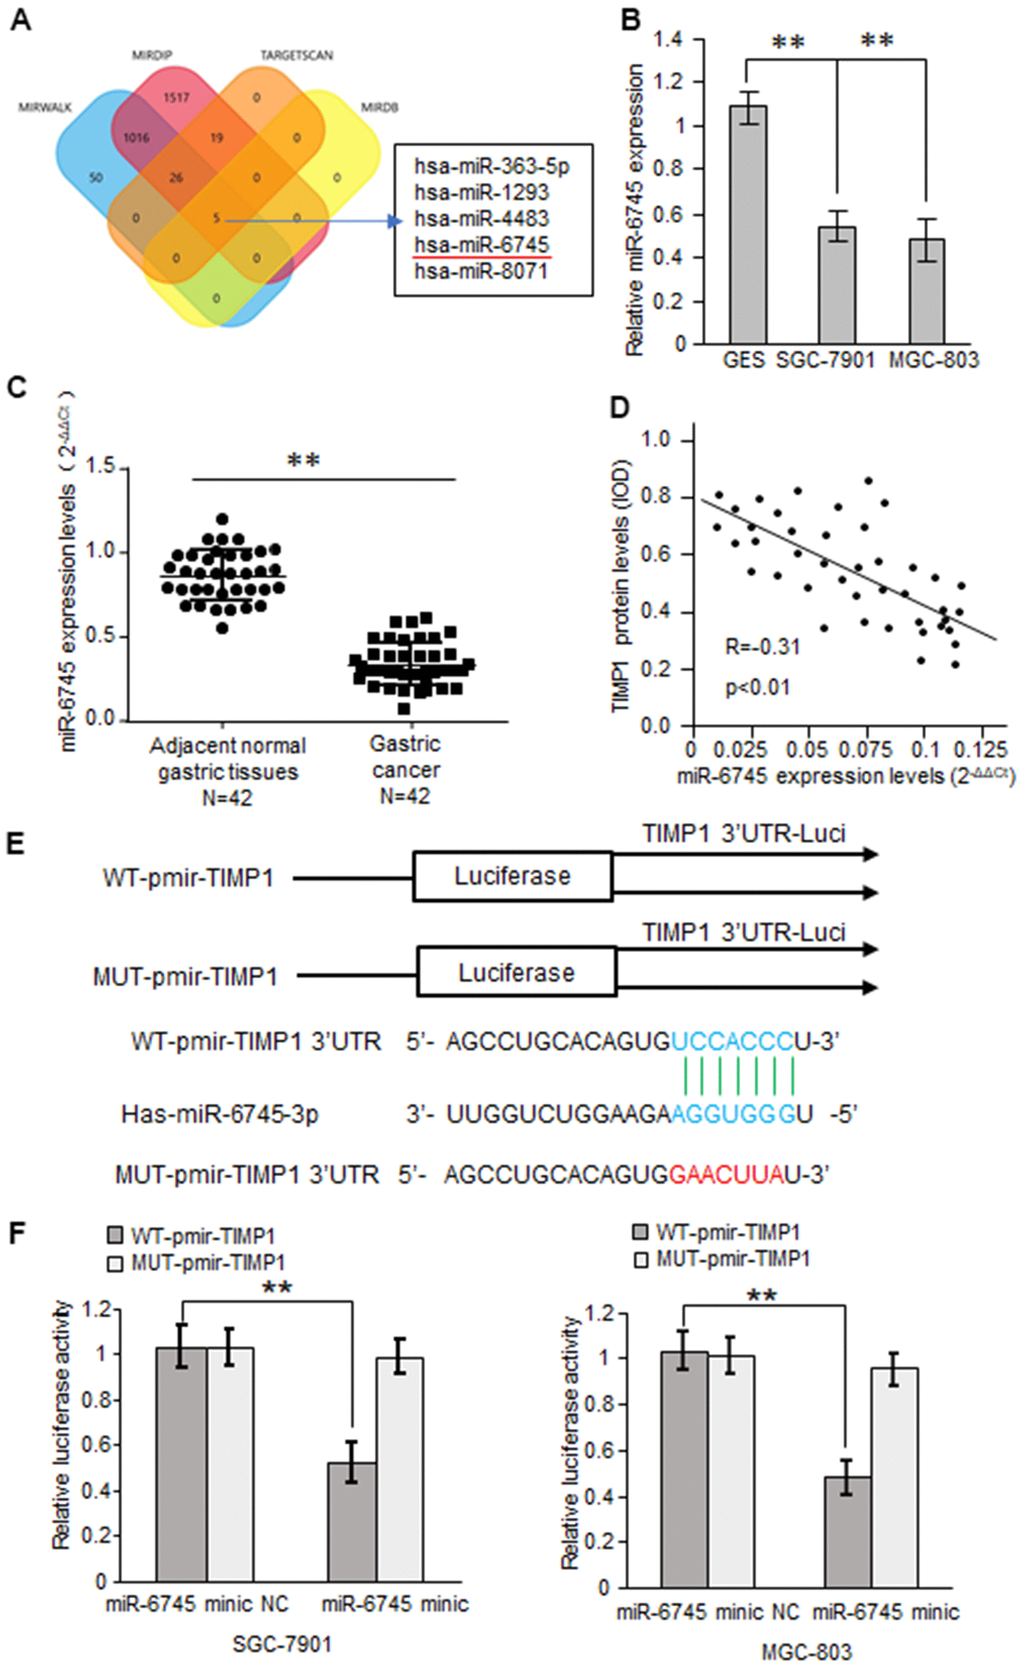 TIMP1 is a direct target of miR-6745. (A) The four-way Venn diagram reveals the numbers of overlapping miRNAs obtained using four publicly available bioinformatics algorithms and the microarray-based TIMP1 signature. (B) Real-time RT-PCR was used to detect the relative expression of miR-6745 in normal gastric cells and gastric cancer cells. (C) Analysis of miR-6745 expression in 42 gastric carcinoma tissues and 42 adjacent normal gastric tissues. (D) Correlation between miR-6745 levels and TIMP1 levels in 42 gastric carcinoma tissues. (E) Nucleotide predicted miR-6745-binding site in the TIMP1 mRNA 3′-UTR. (F) Luciferase activities were measured in SGC-7901 and MGC-803 cells transfected with reporter plasmids containing WT-pmir-TIMP1 or MUT-pmir-TIMP1 together with miR-6745 mimics or miR-6745 mimic NC. Data represent the means ± SEM. **P 